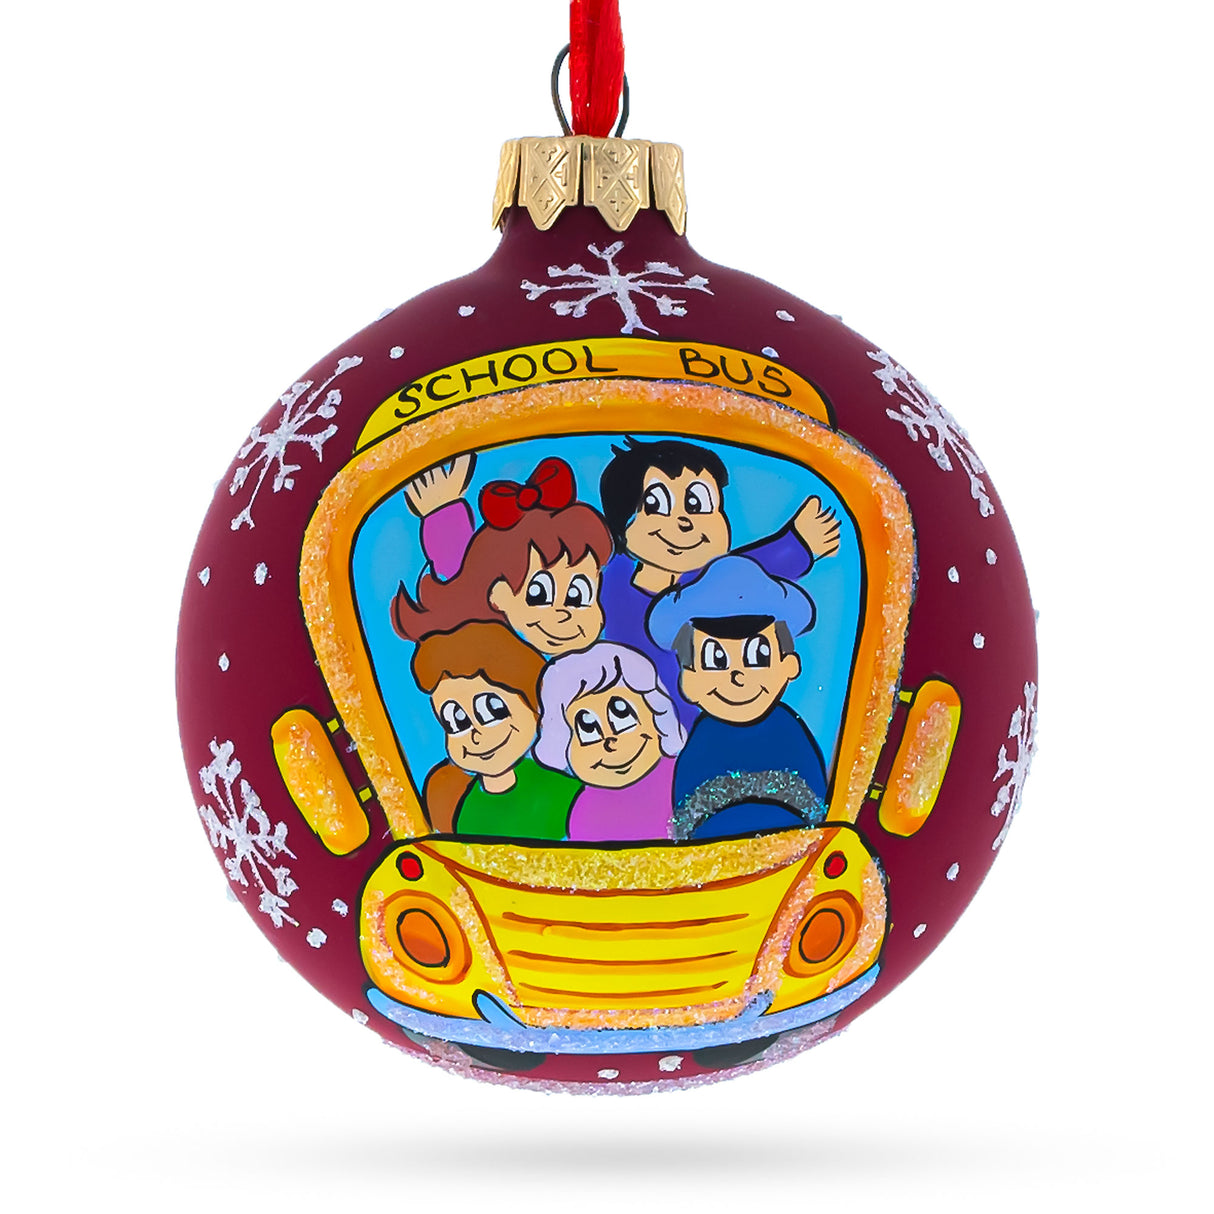 Classic Yellow School Bus Blown Glass Christmas Ornament 3.25 Inches in Red color, Round shape